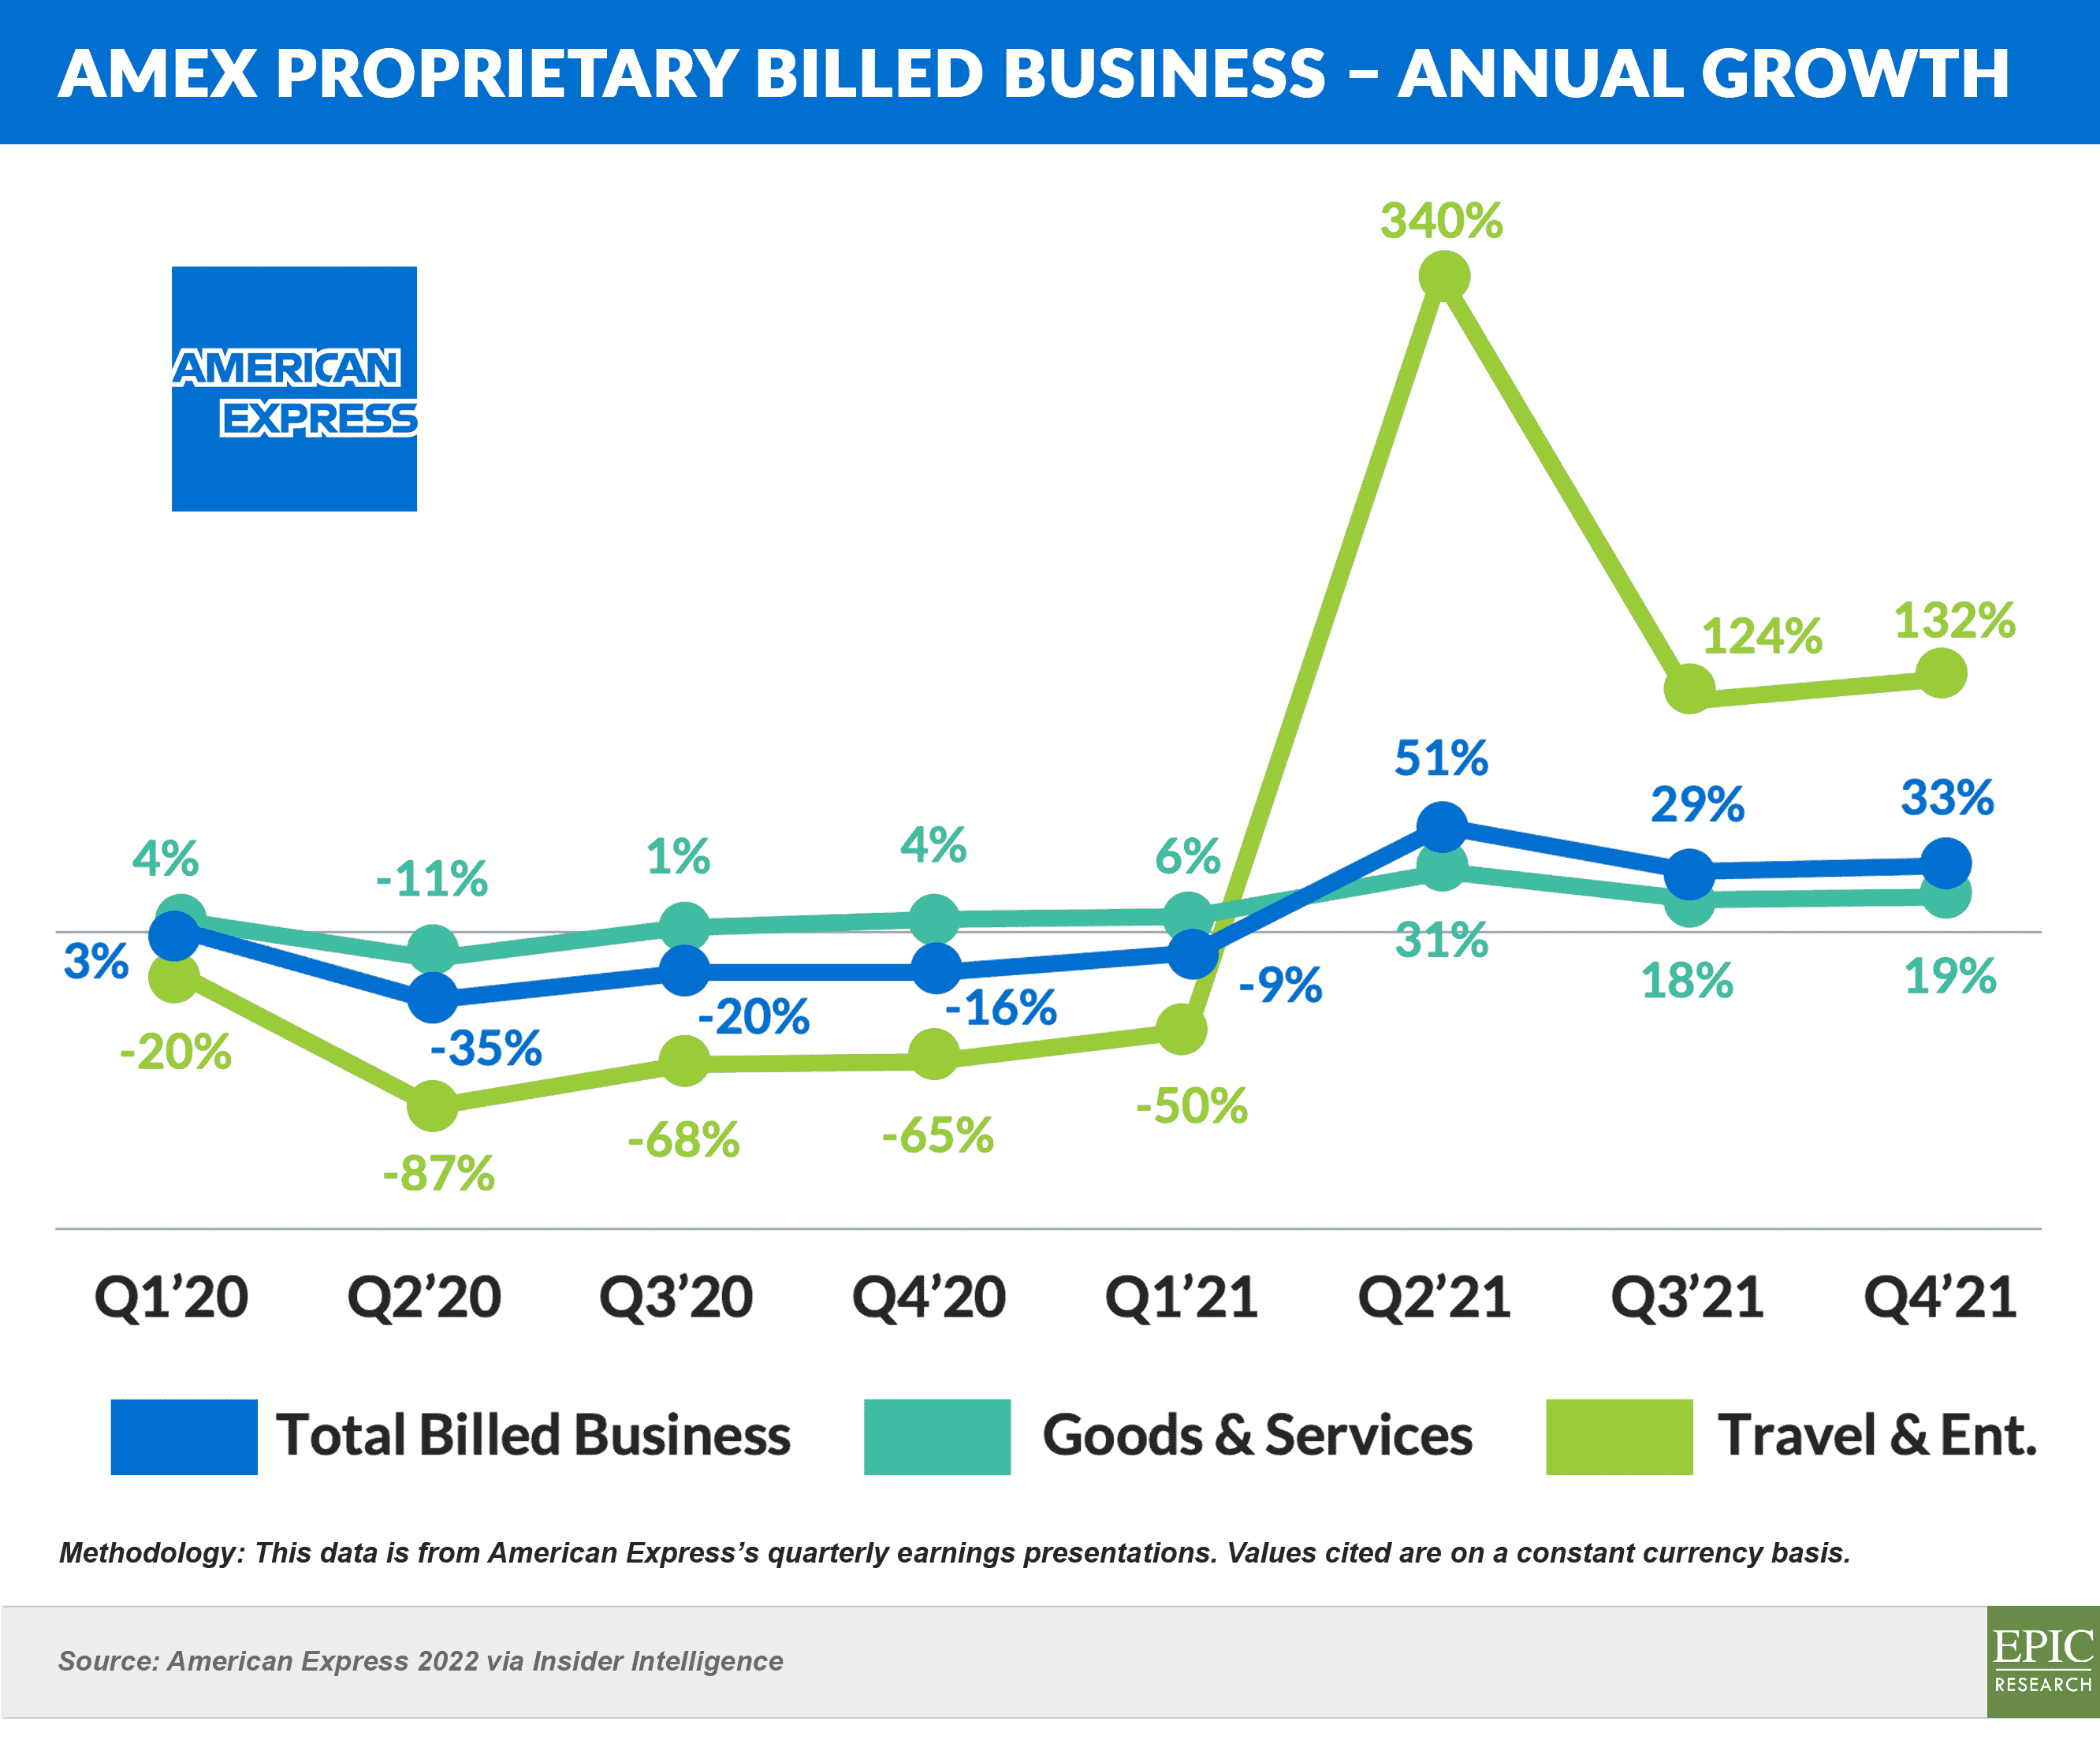 AMEX Proprietary Billed Business – Annual Growth